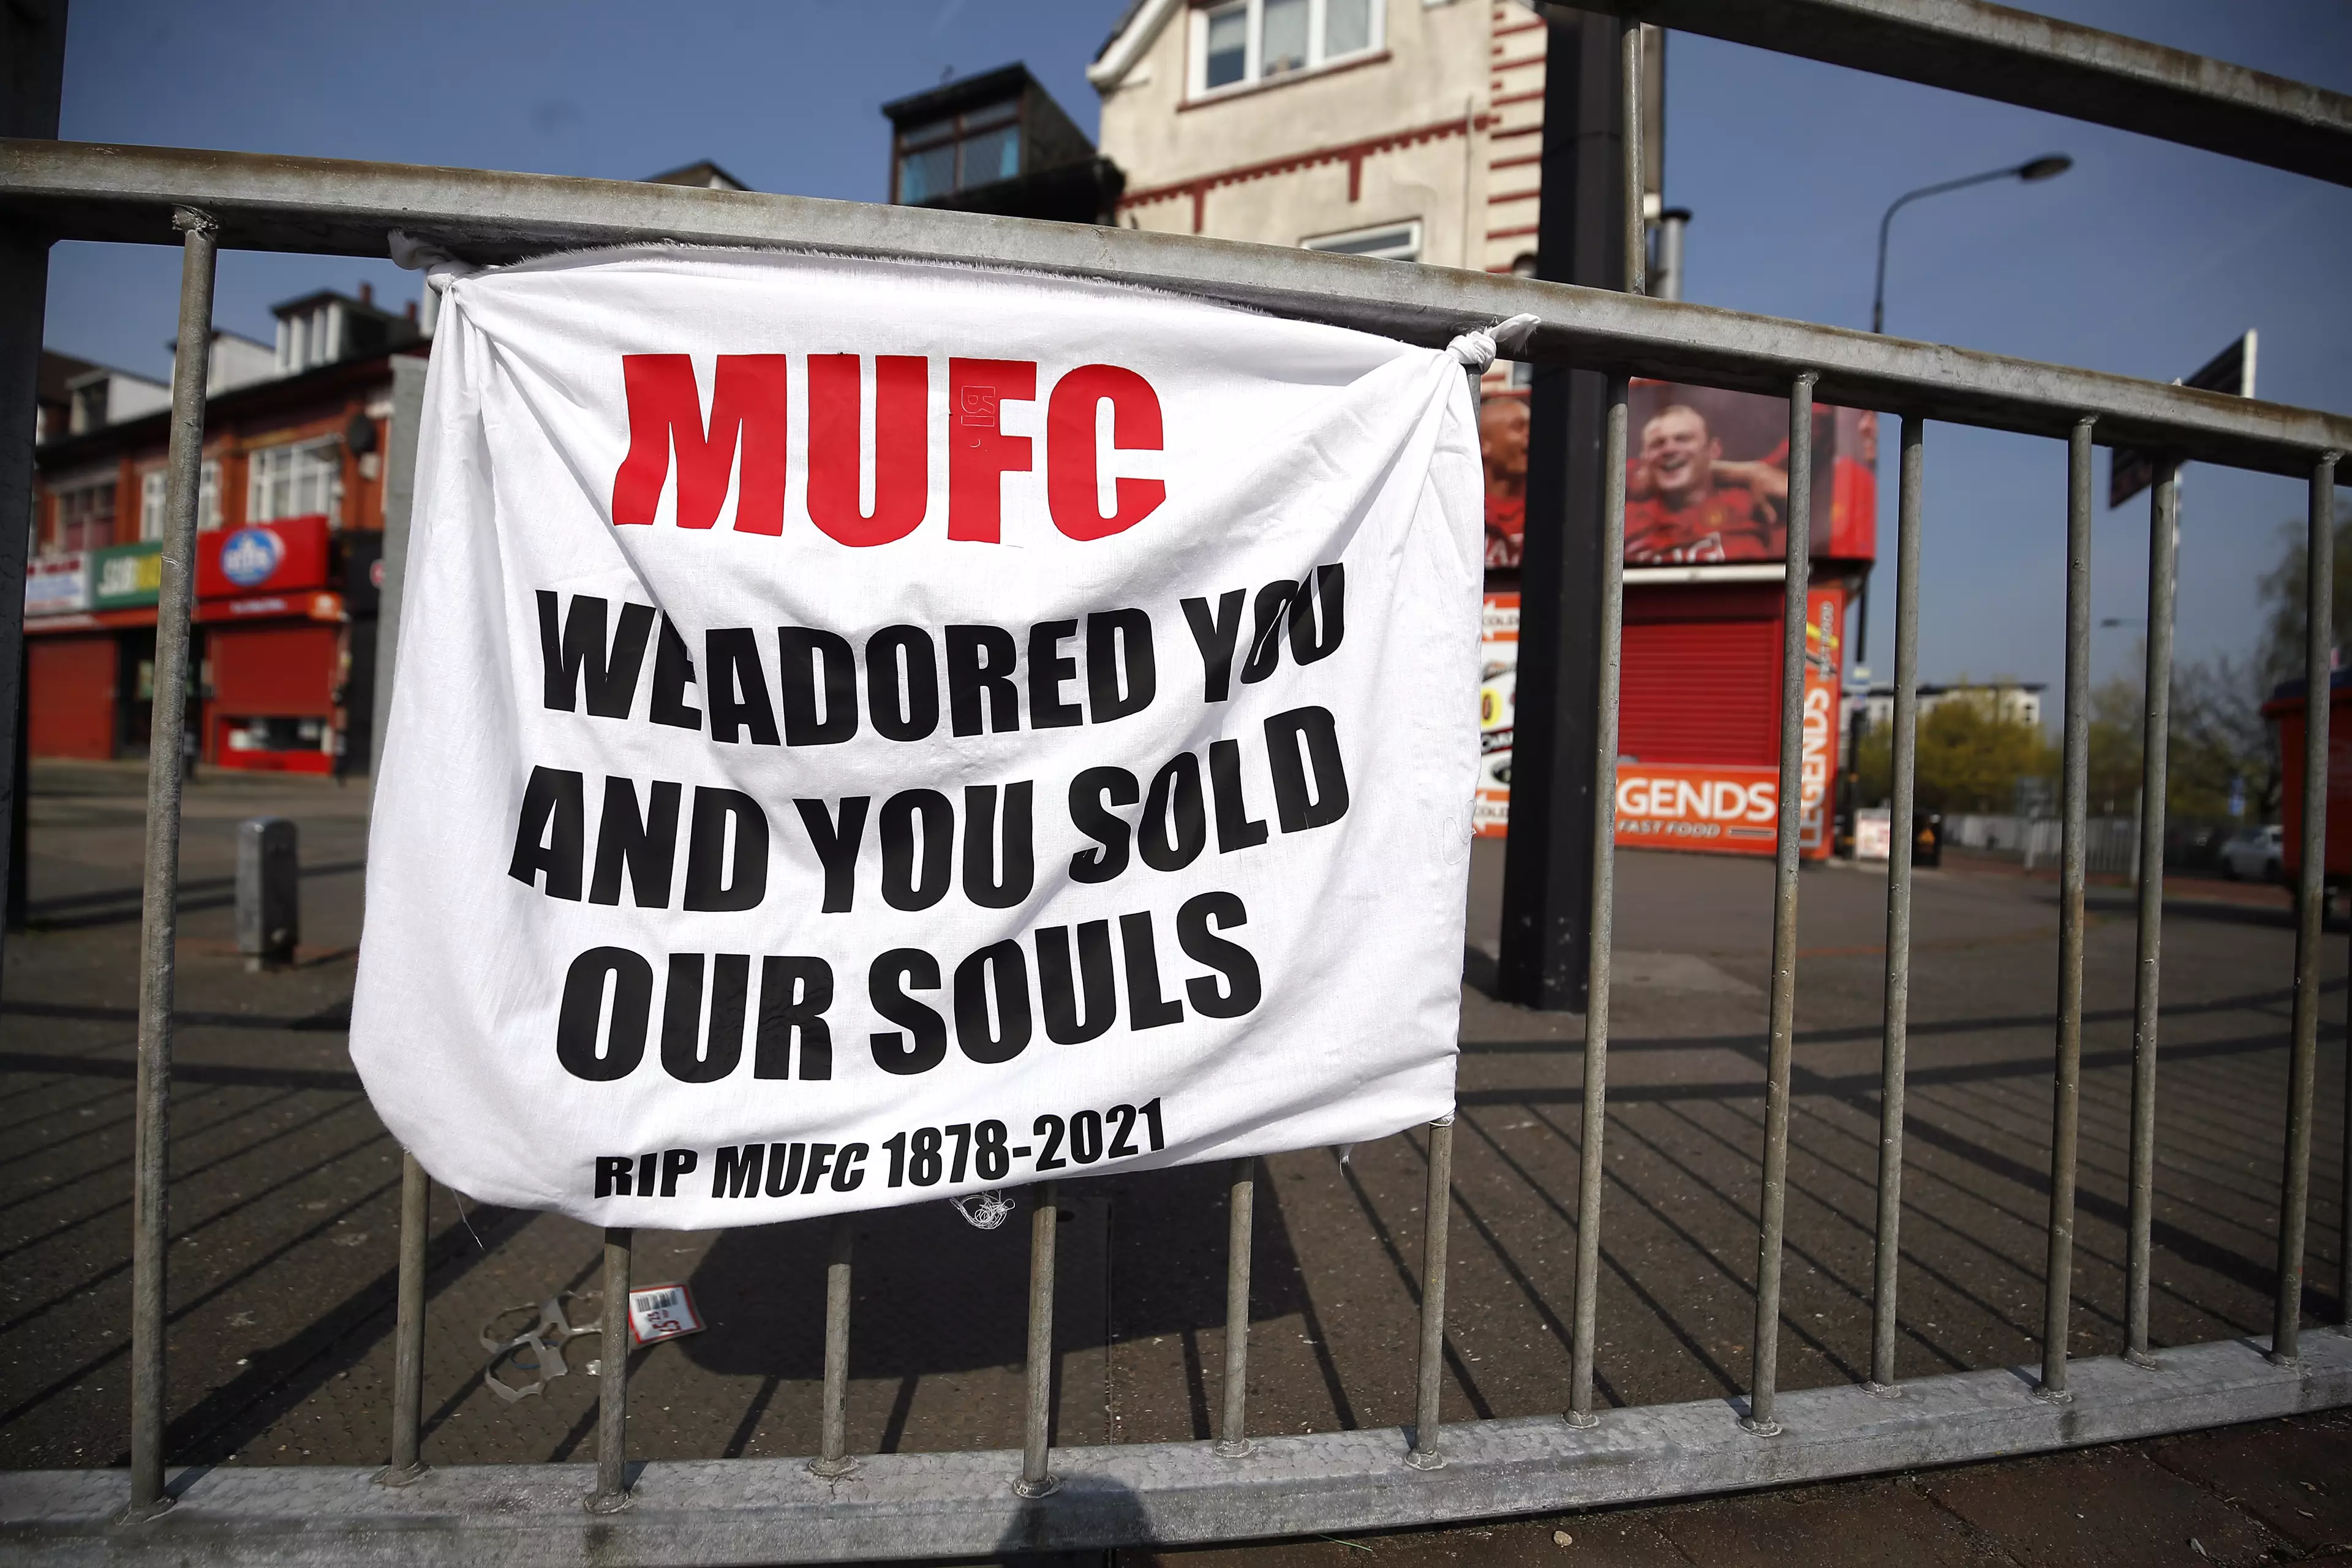 Manchester United fans also made their feelings known outside Old Trafford.